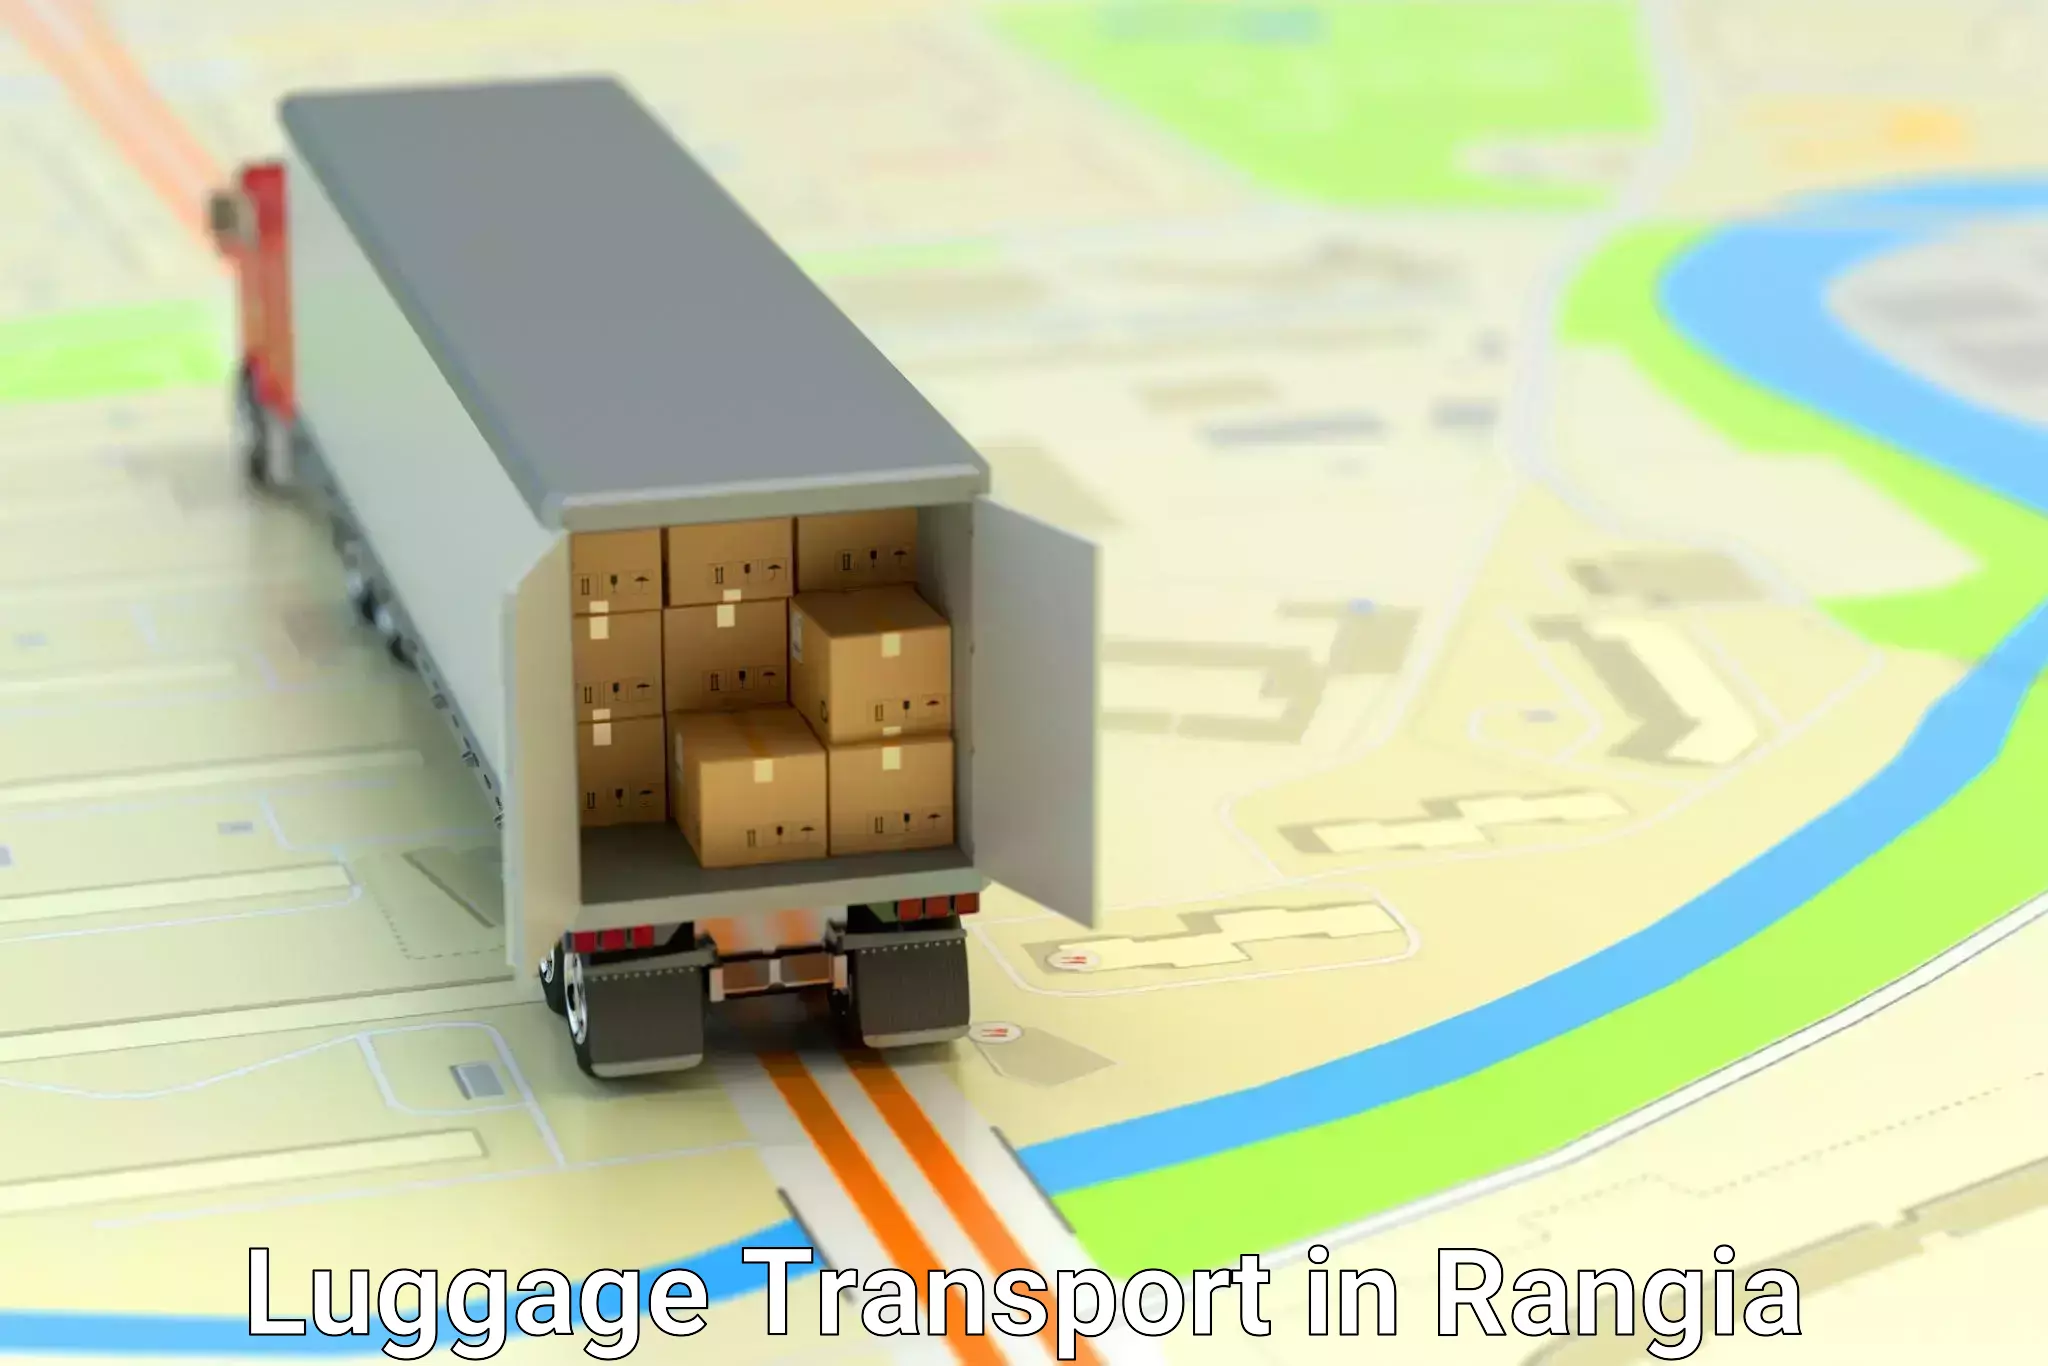 Luggage delivery logistics in Rangia